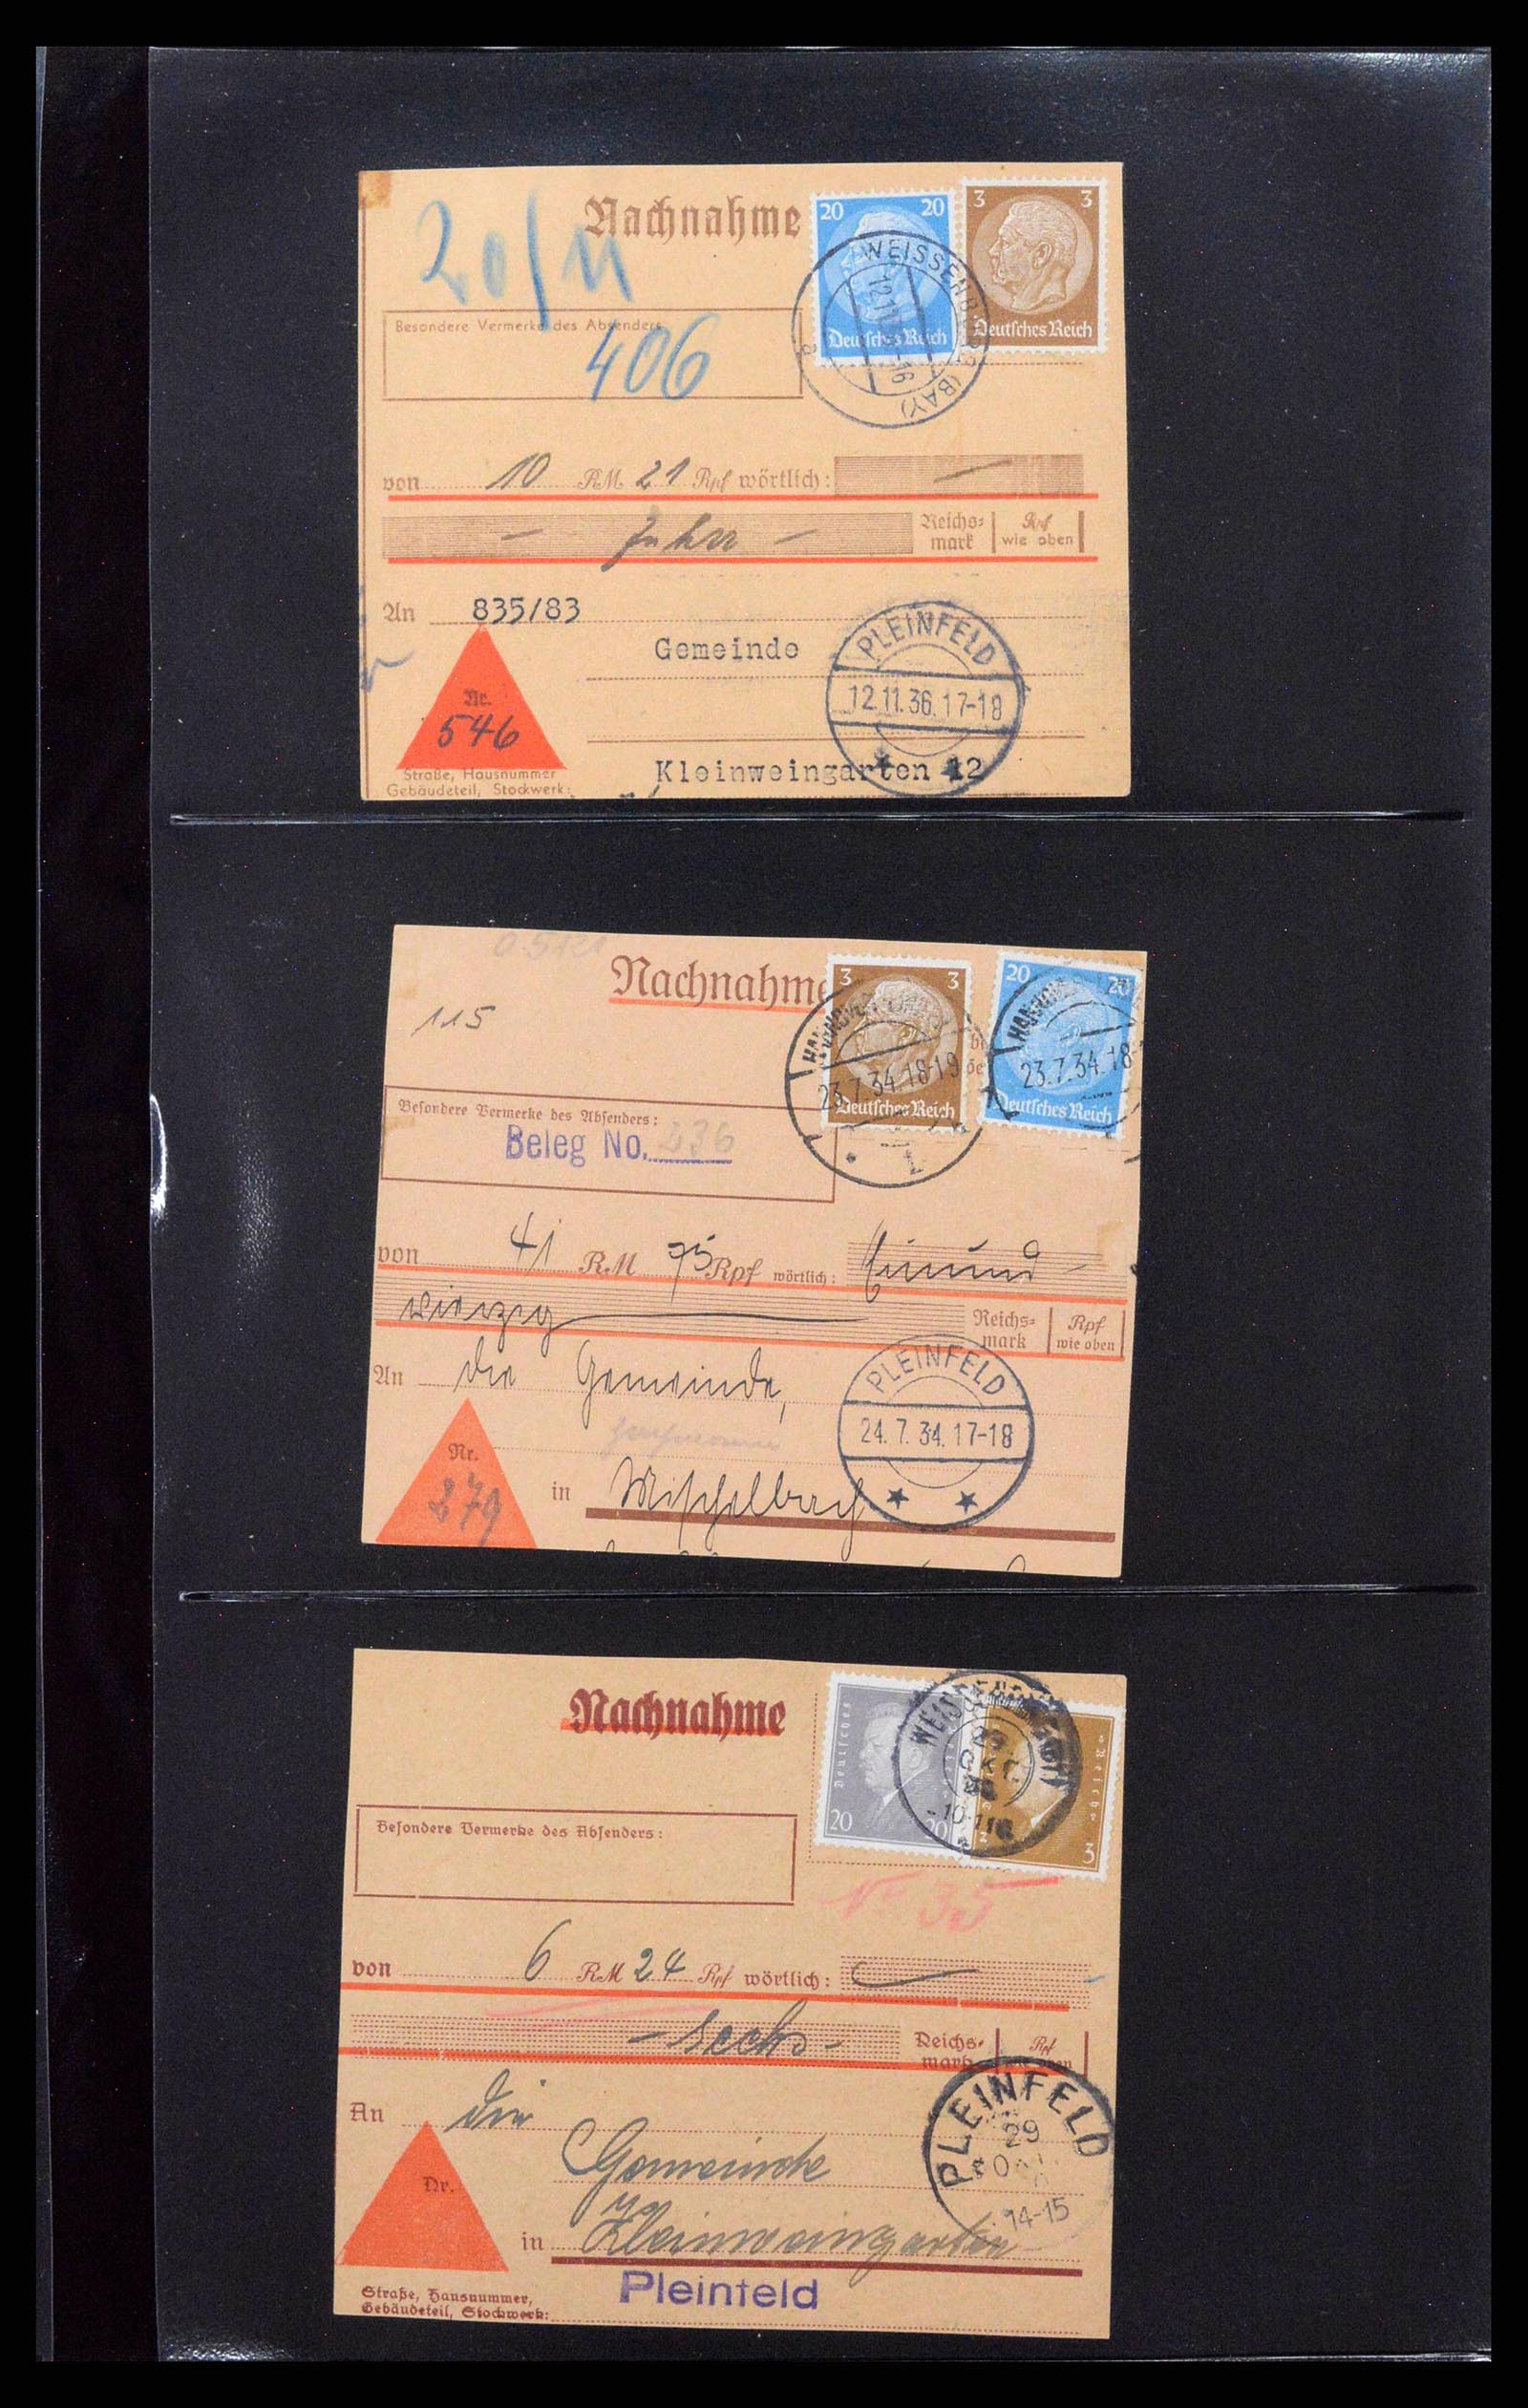 38646 0125 - Stamp collection 38646 Germany covers and cards 1940-1945.